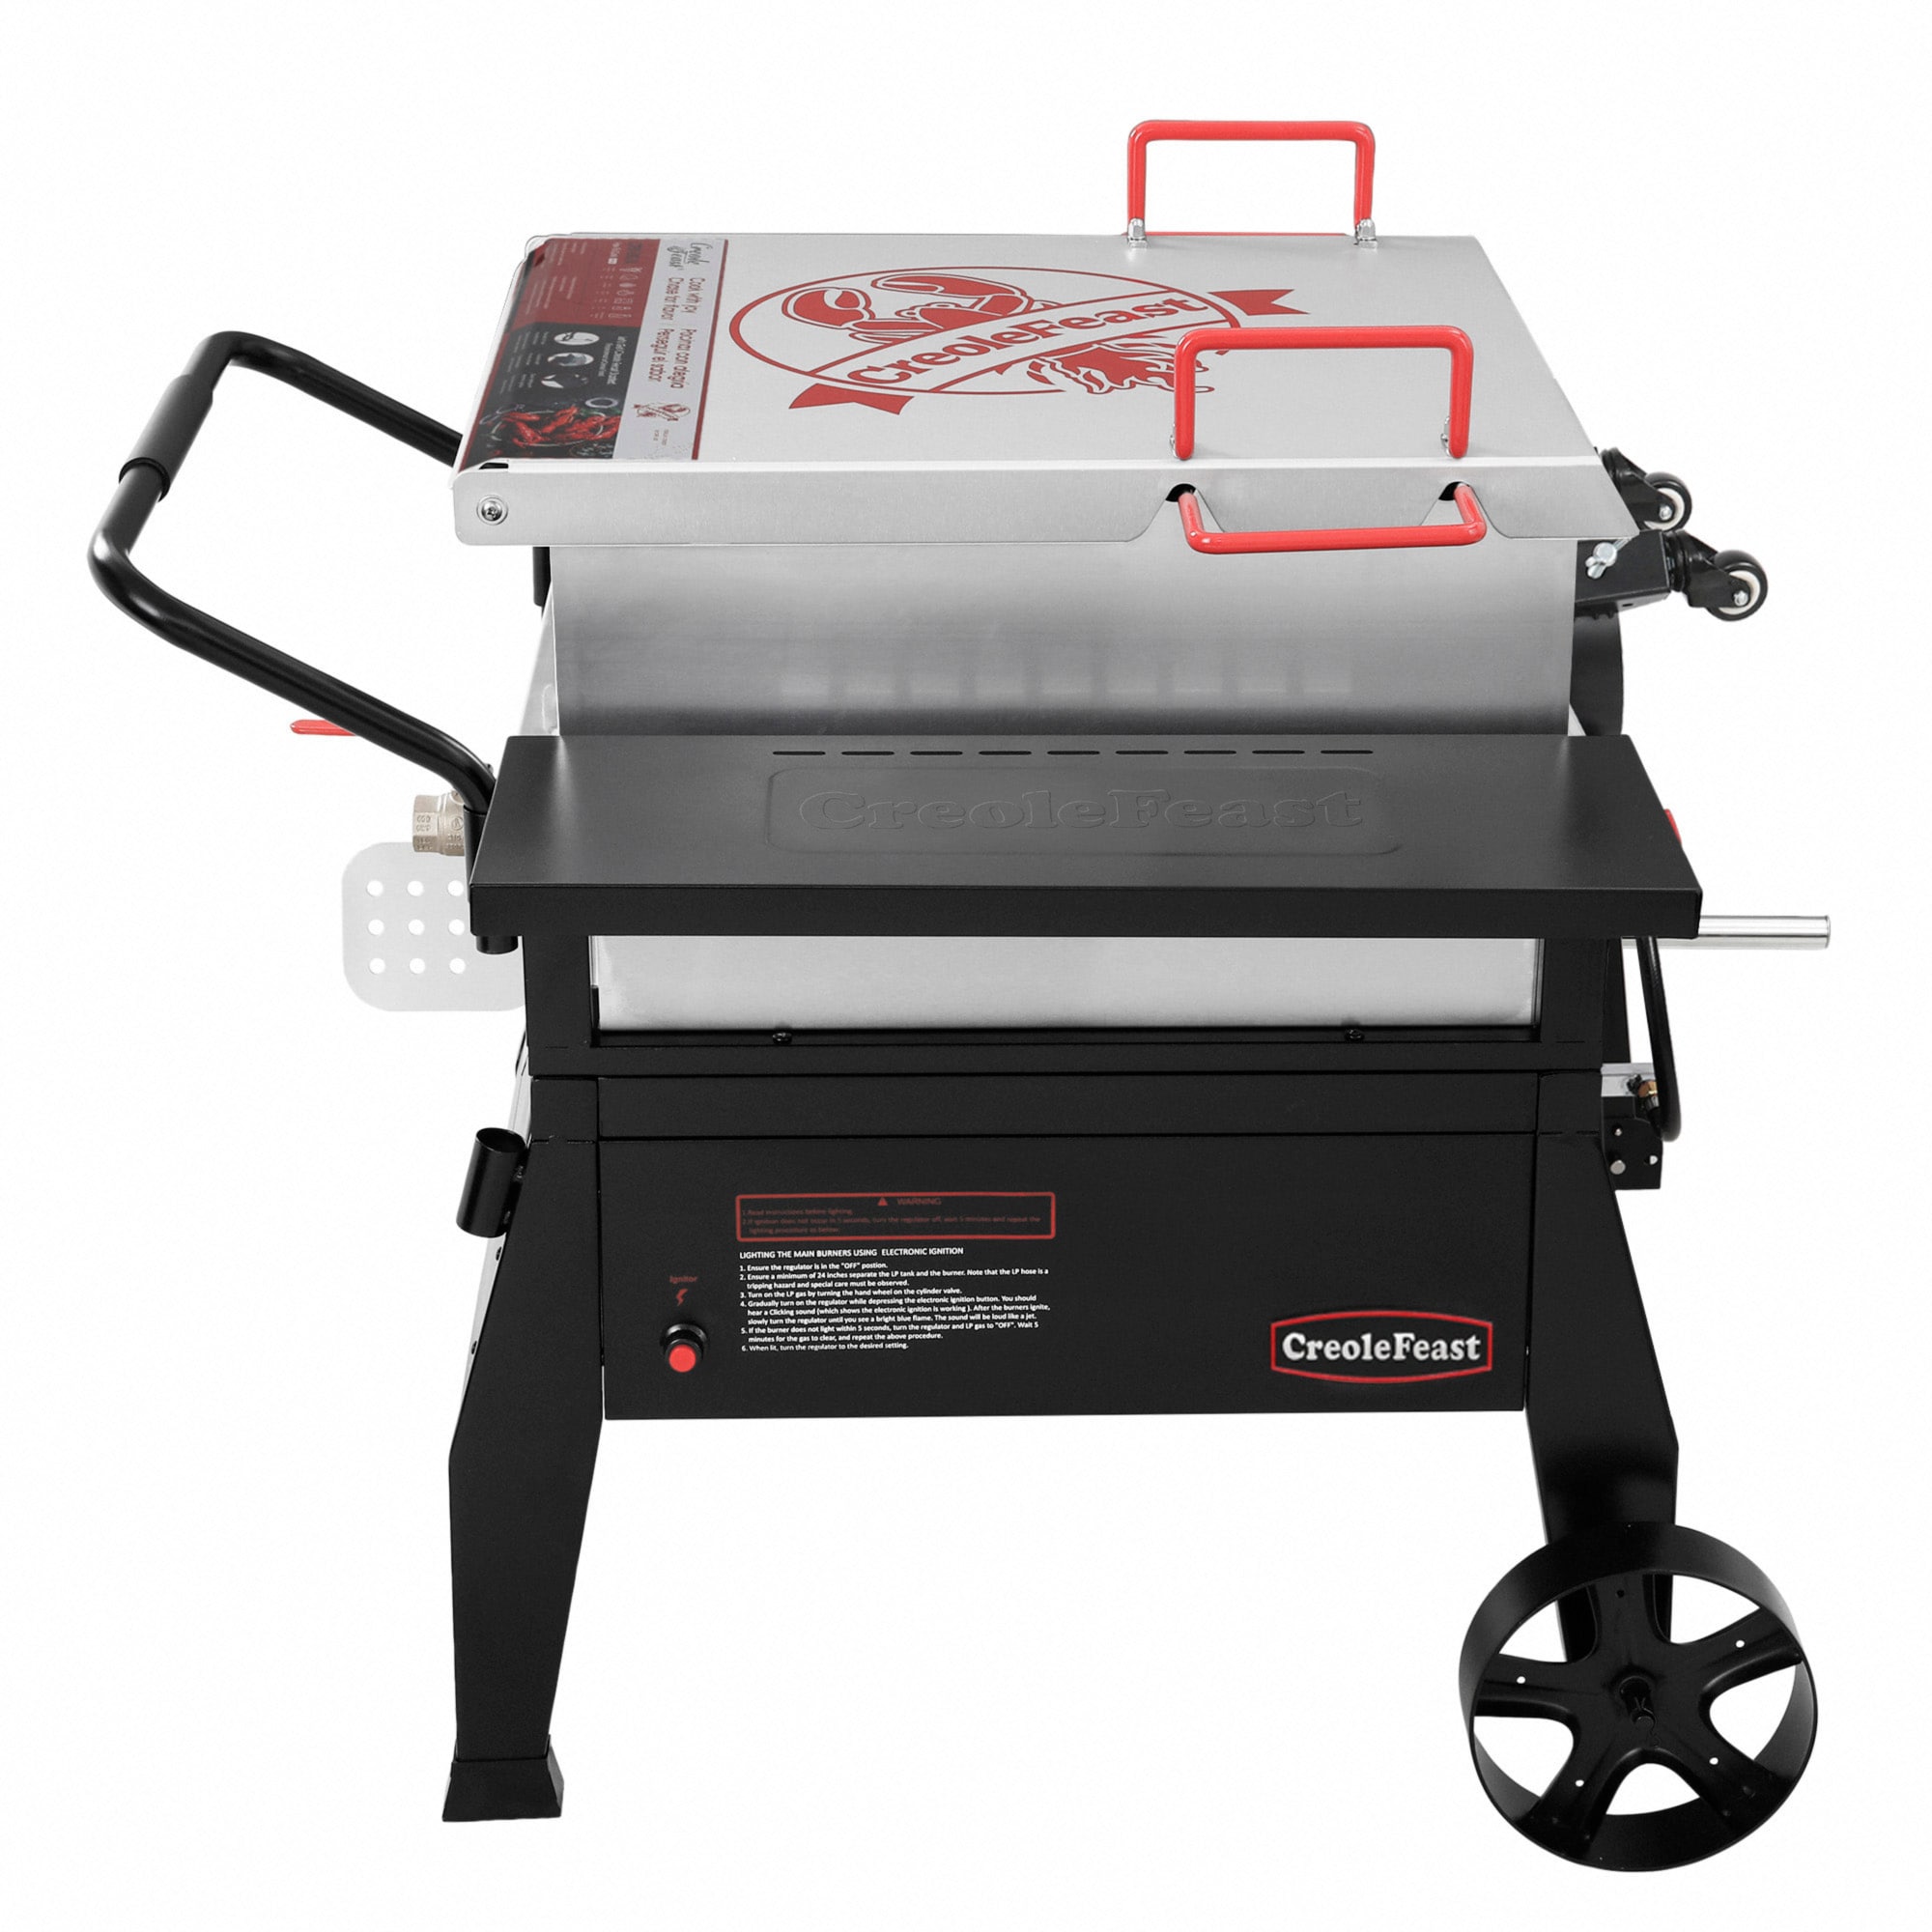 Creole Feast Creole Feast CFB1001A, Single Sack Crawfish Boiler, 90 Quart Outdoor Stove Propane Gas Cooker with 10-psi Regulator and Folding Tank